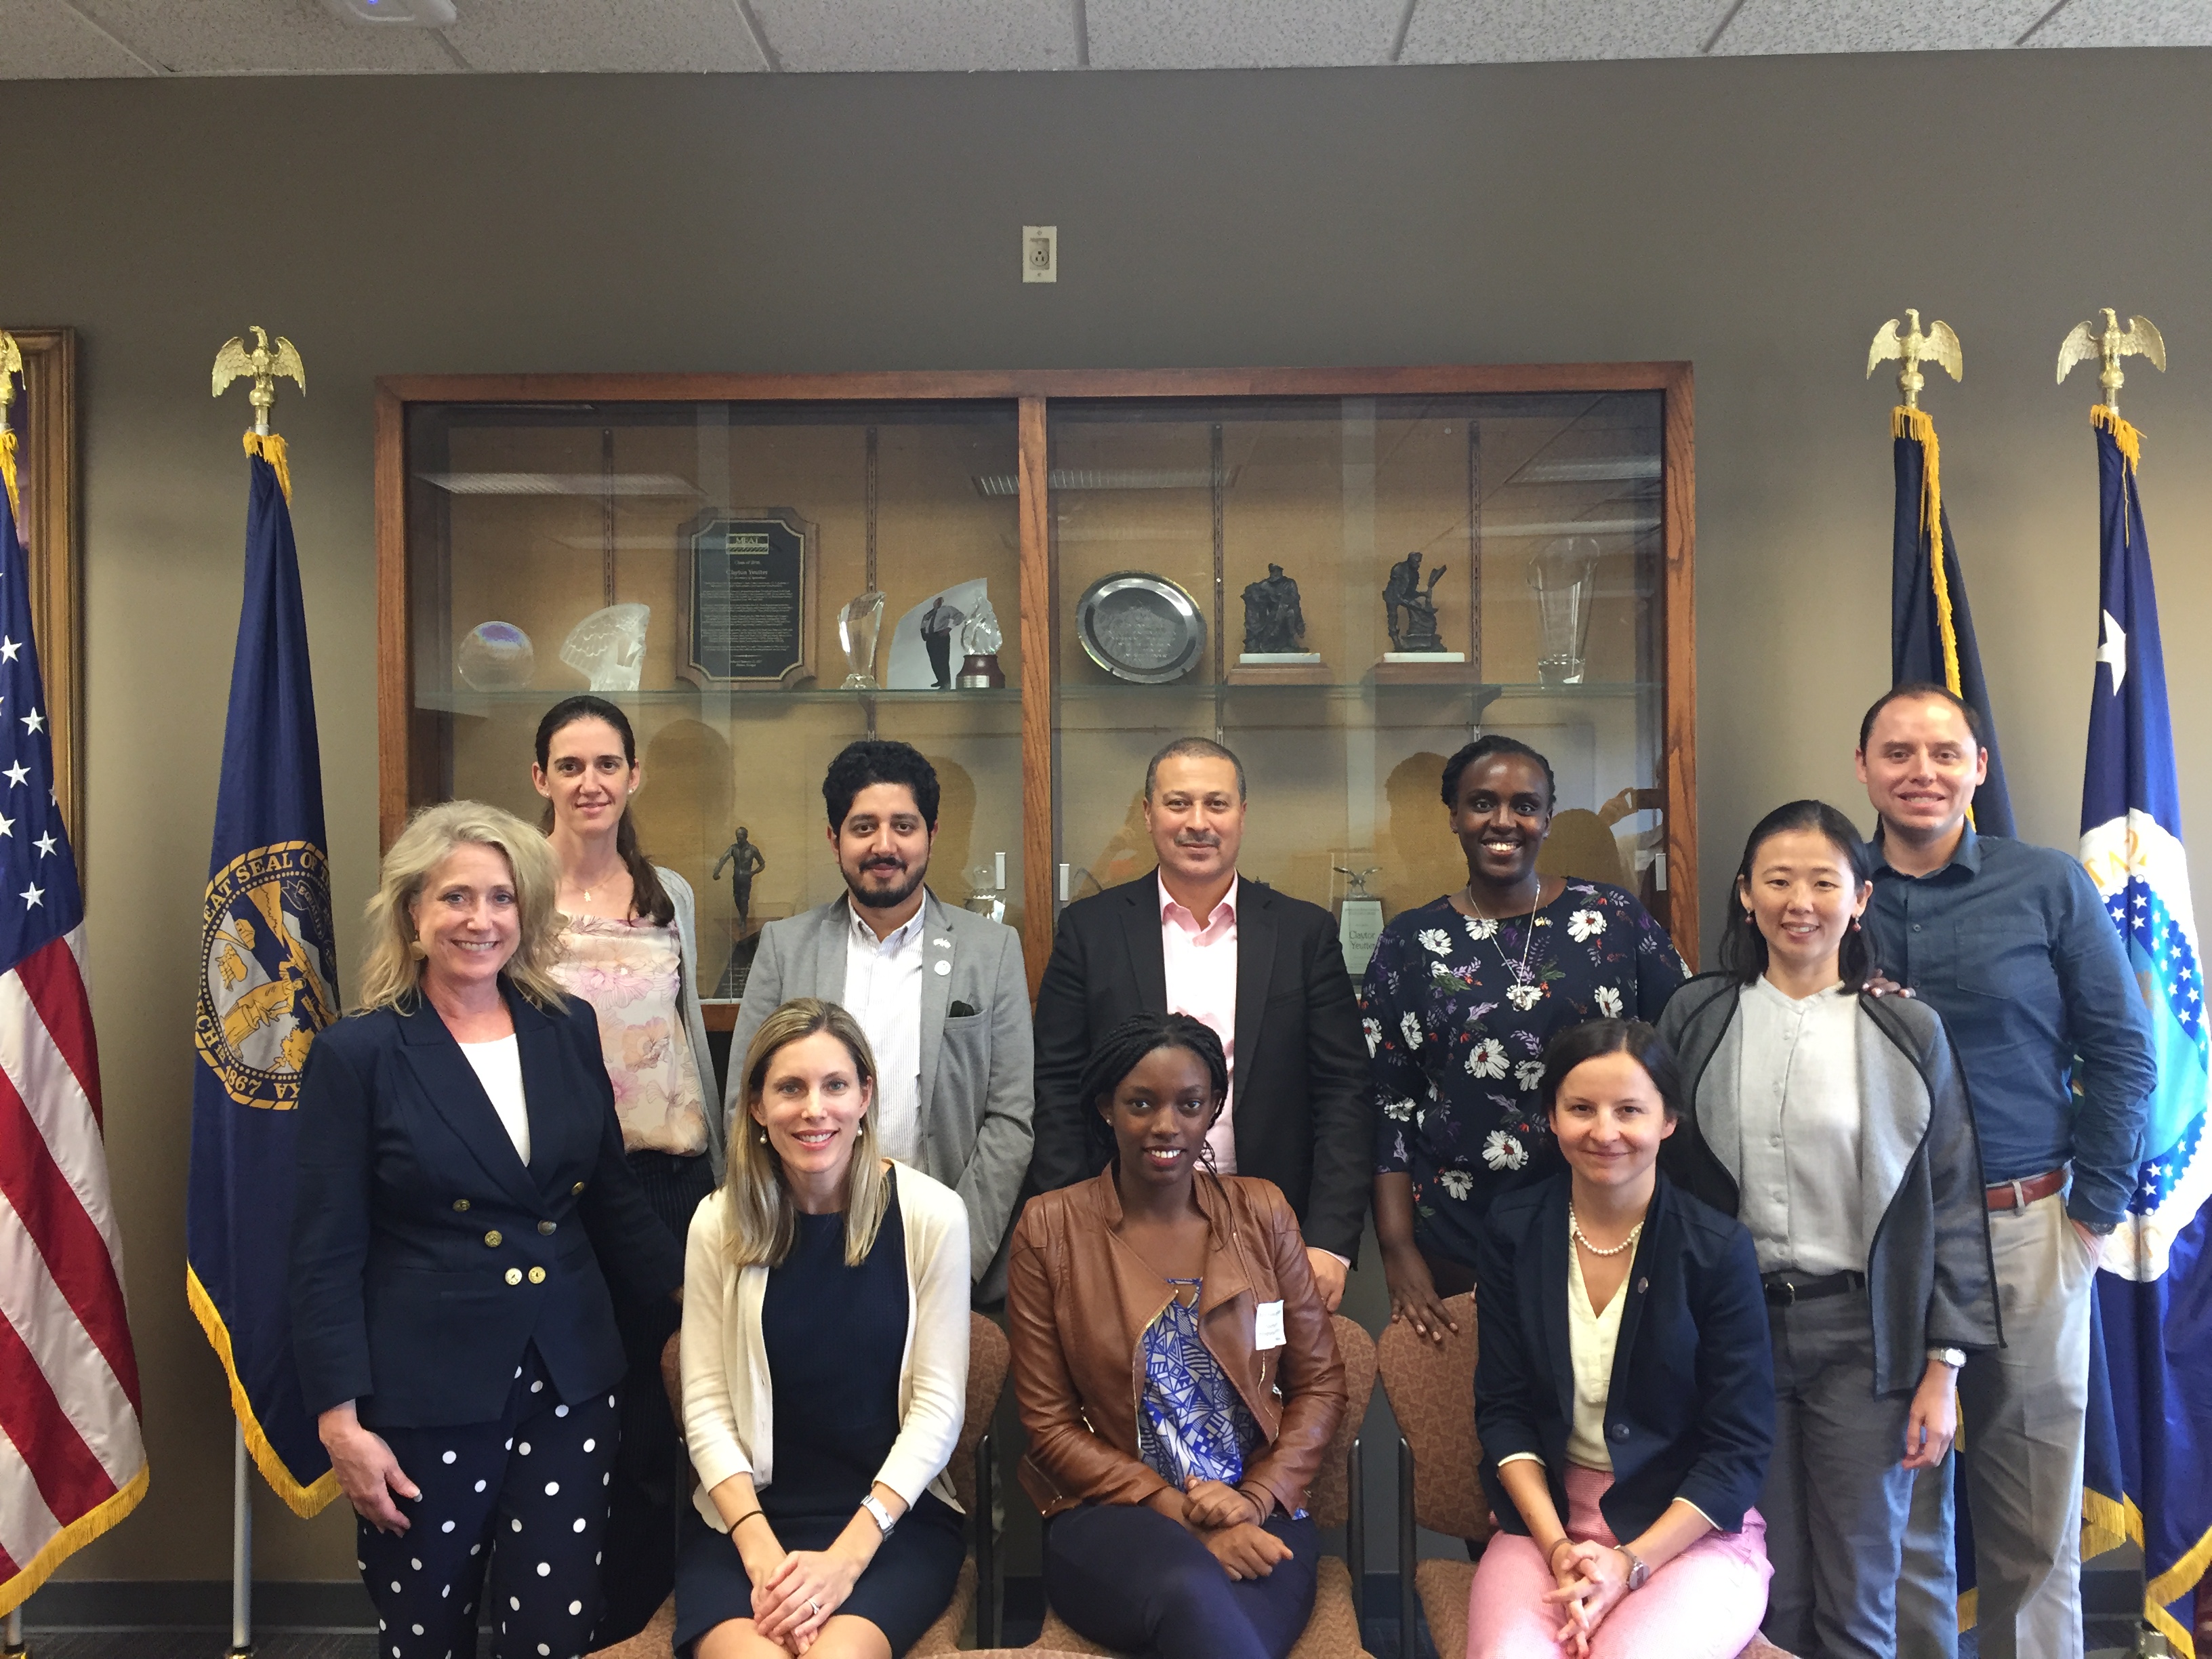 In September 2018, Nebraska hosted a group of State Department IVLP-led group of professionals from Rwanda, Tunisia, Mexico, Philippines, Saudi Arabia & Poland for a conversation on trade.